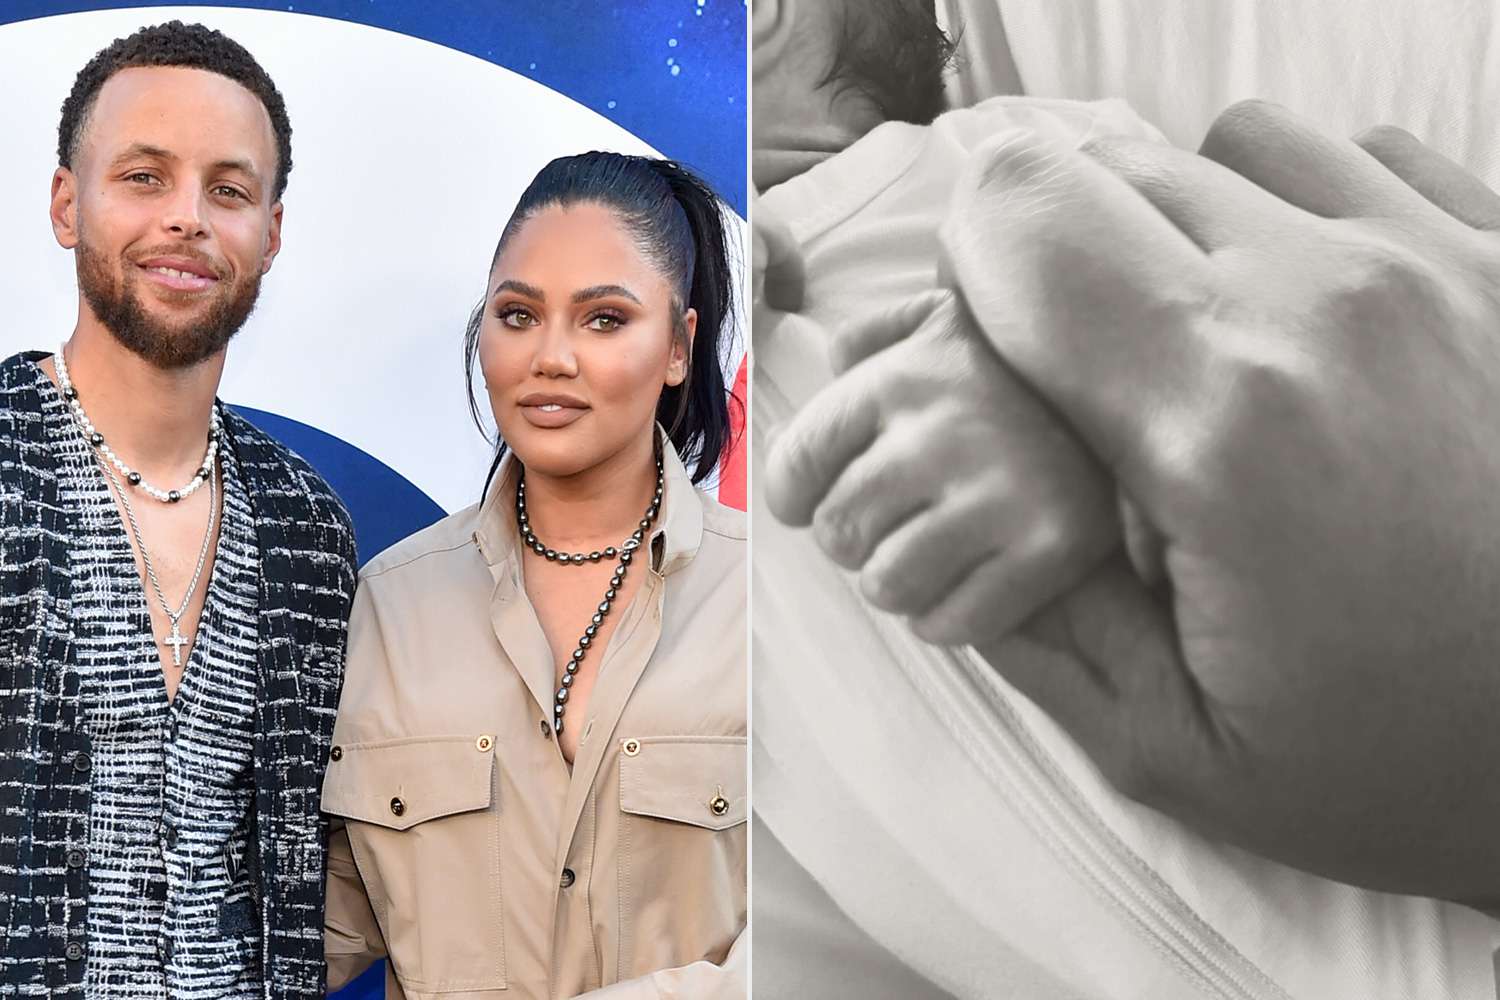 Ayesha and Stephen Curry Announce Early Birth of Their 4th Baby, a Boy: 'He's Doing Great'